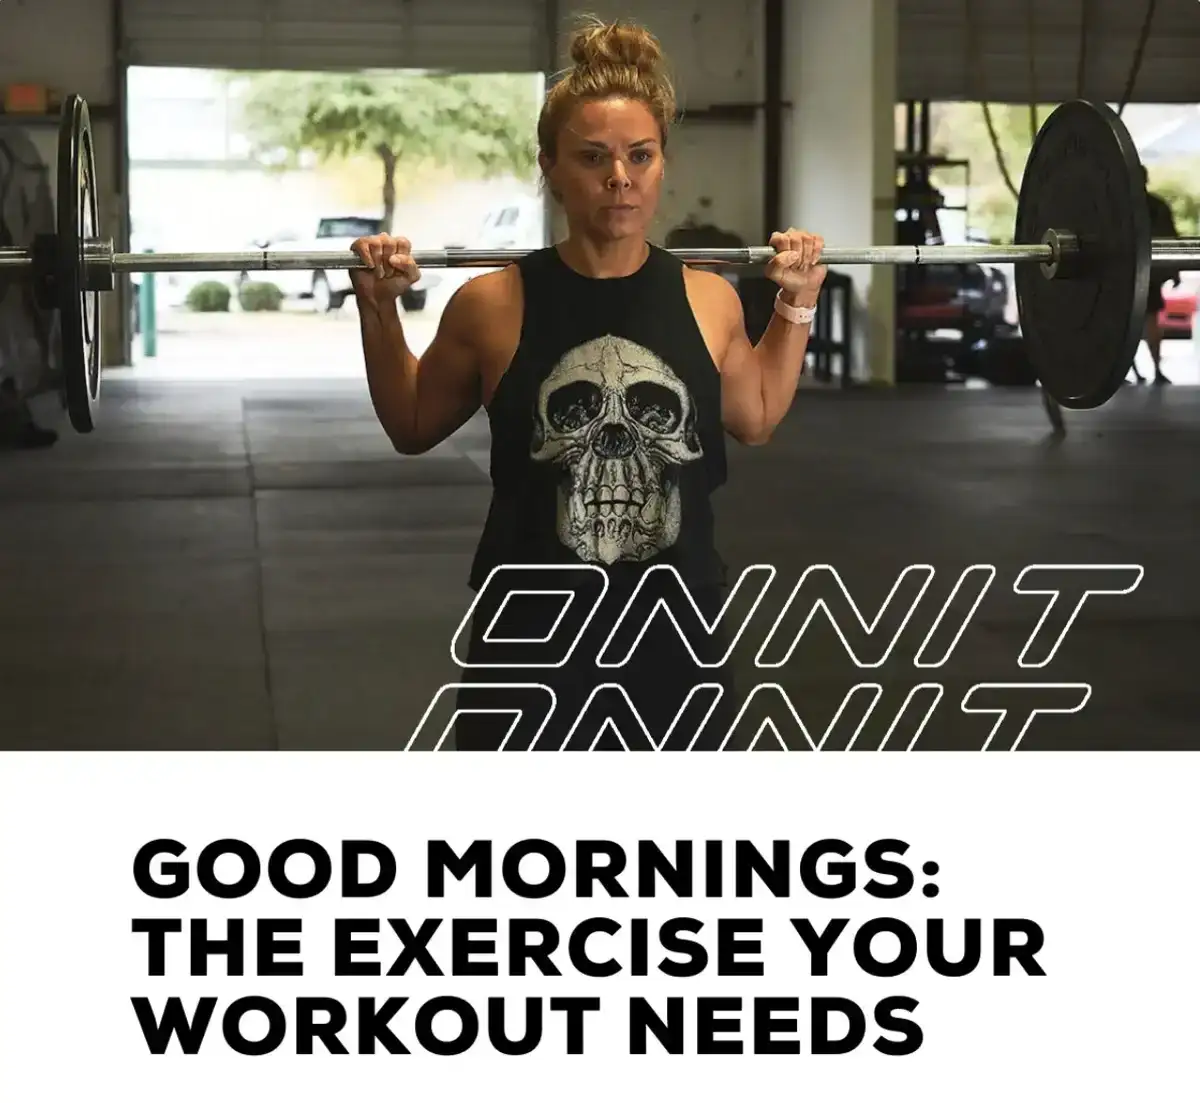 Good Mornings: The Exercise Your Workout Needs